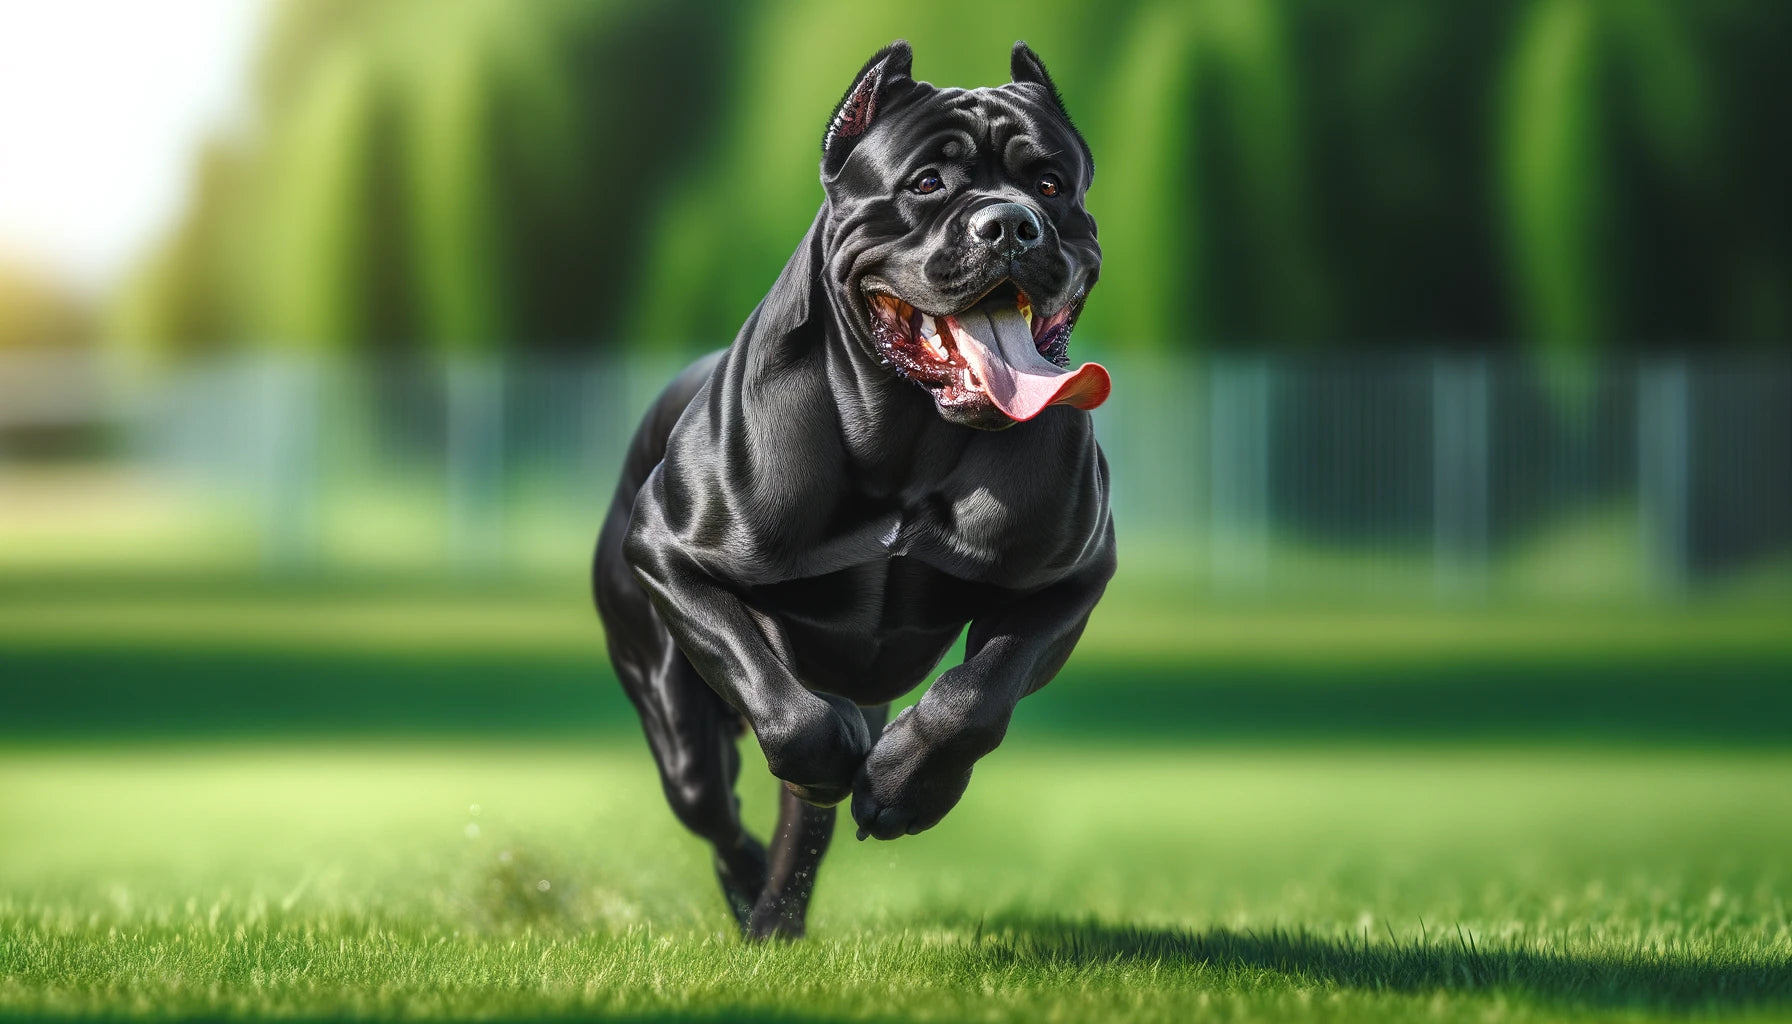 Cane Corso exercising on a grassy field captured mid-run.